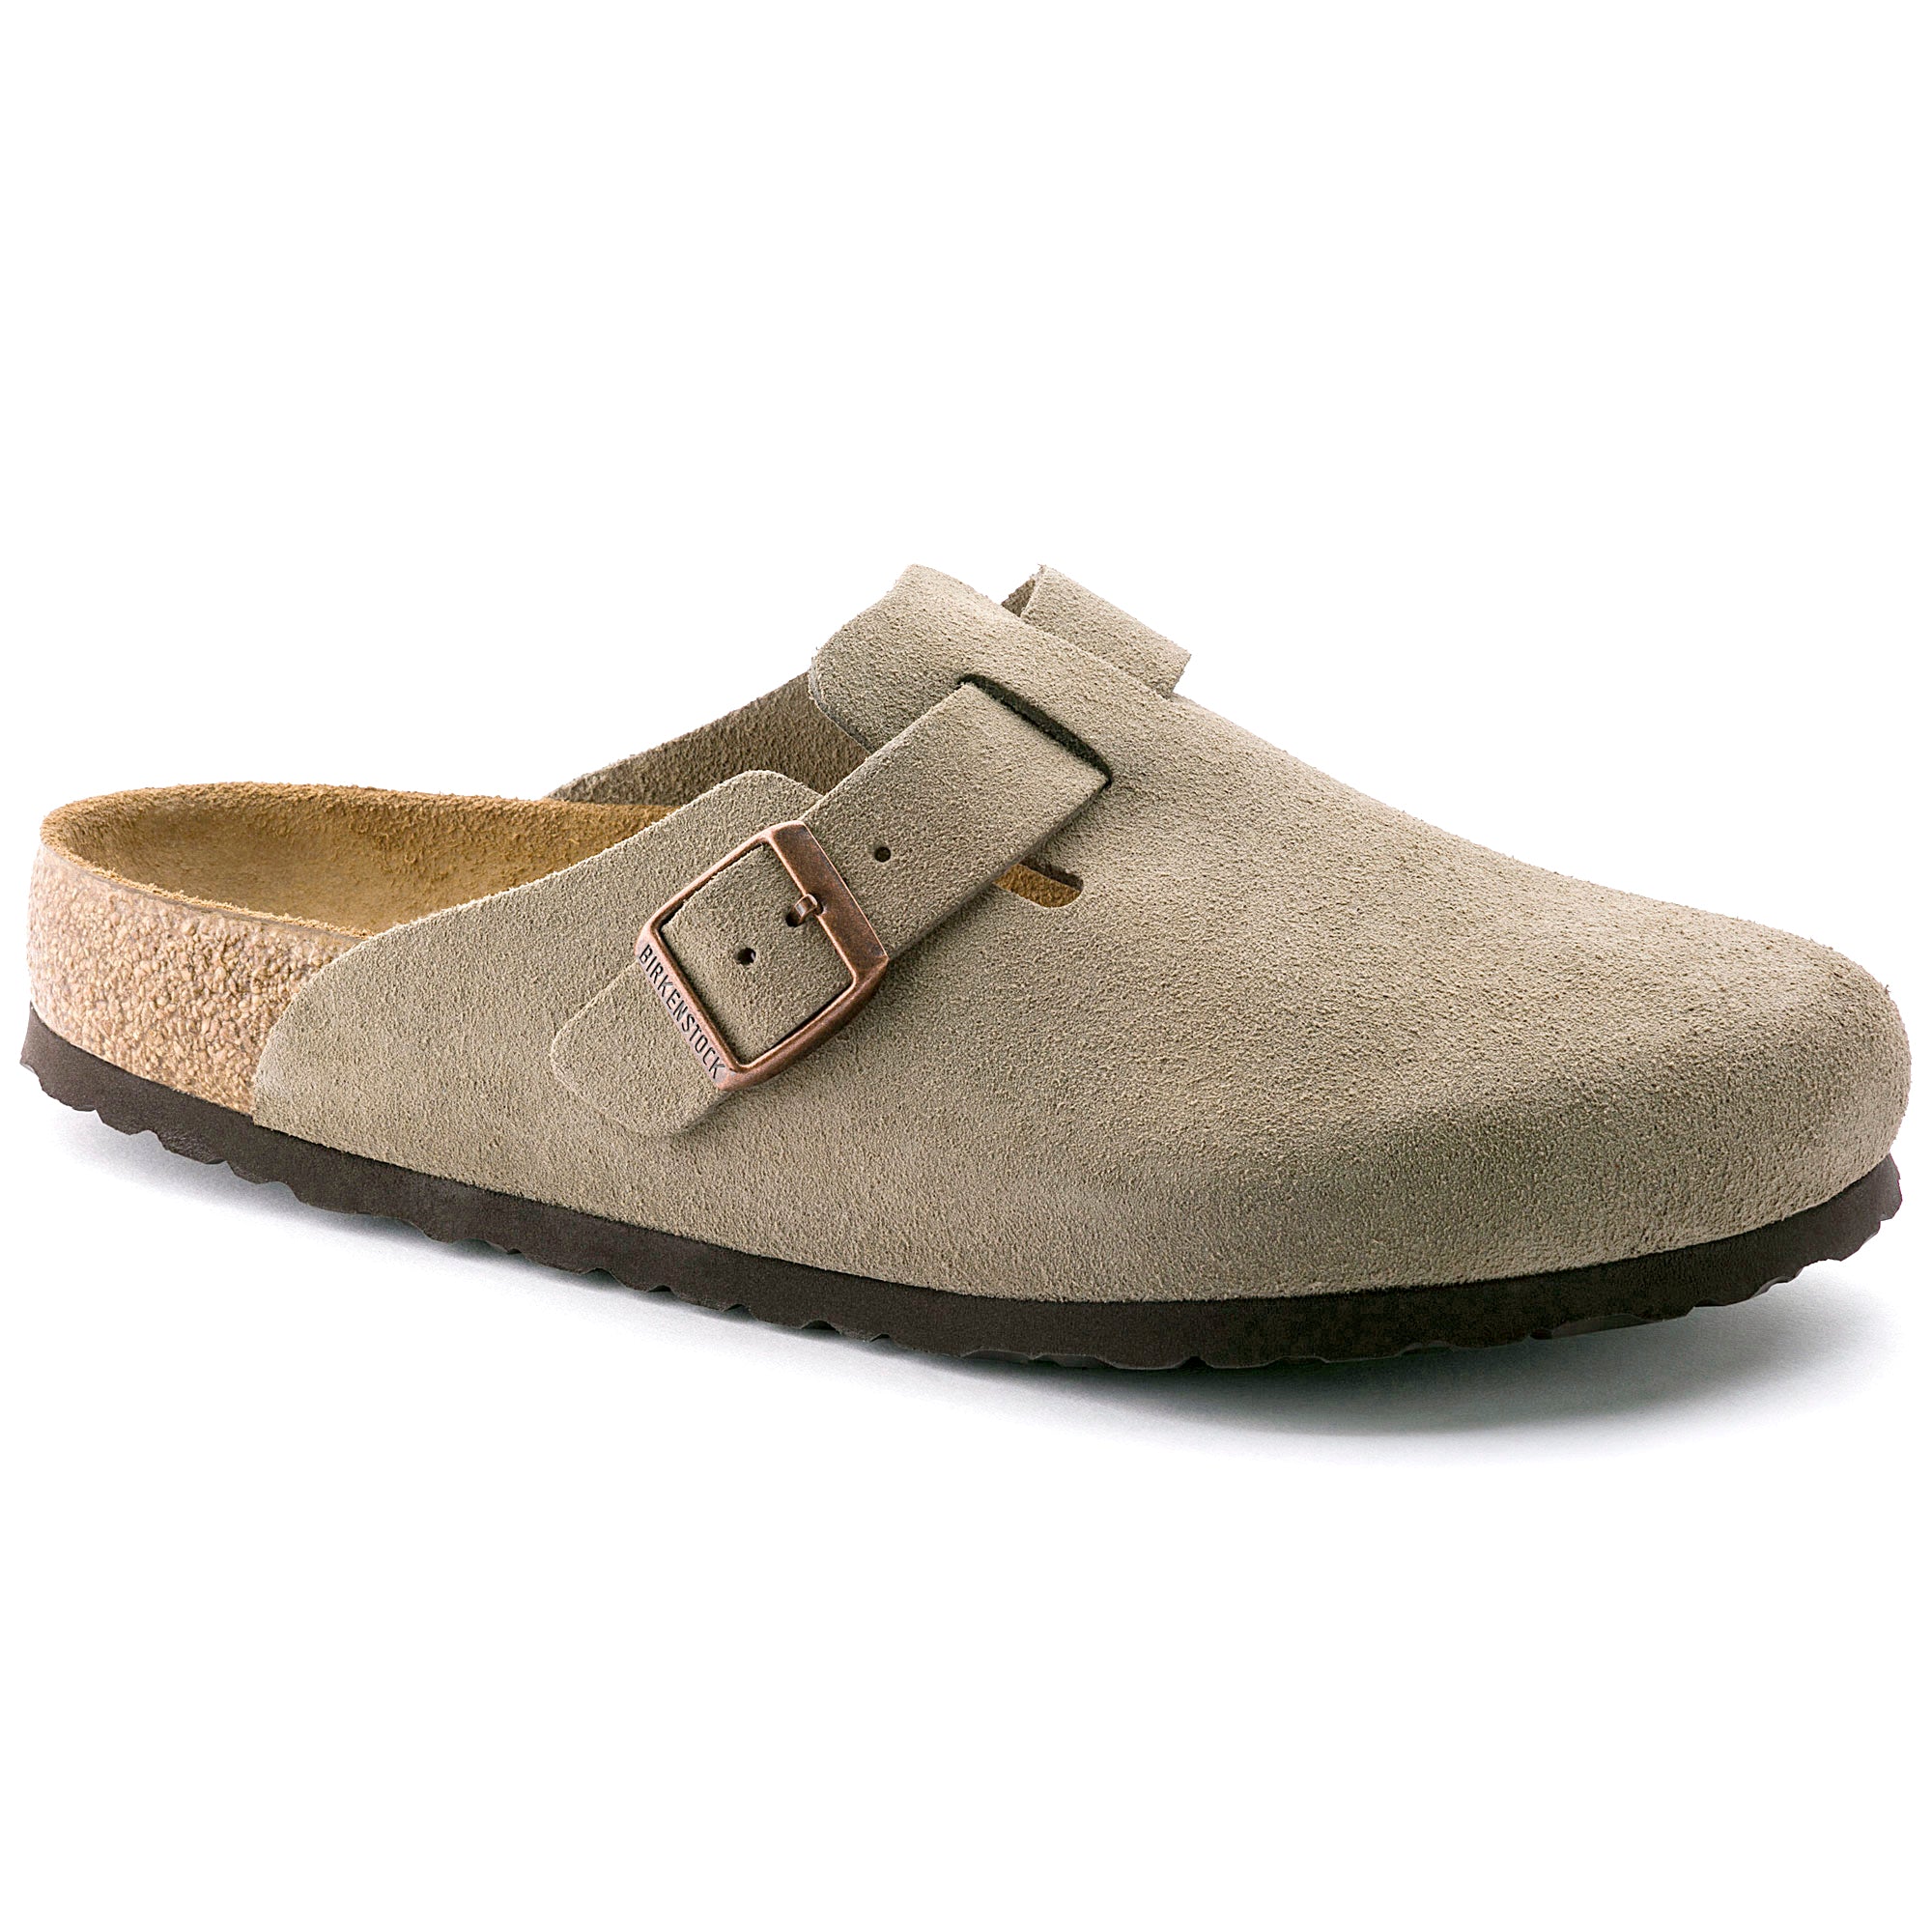 Birkenstock Boston Soft Footbed taupe suede